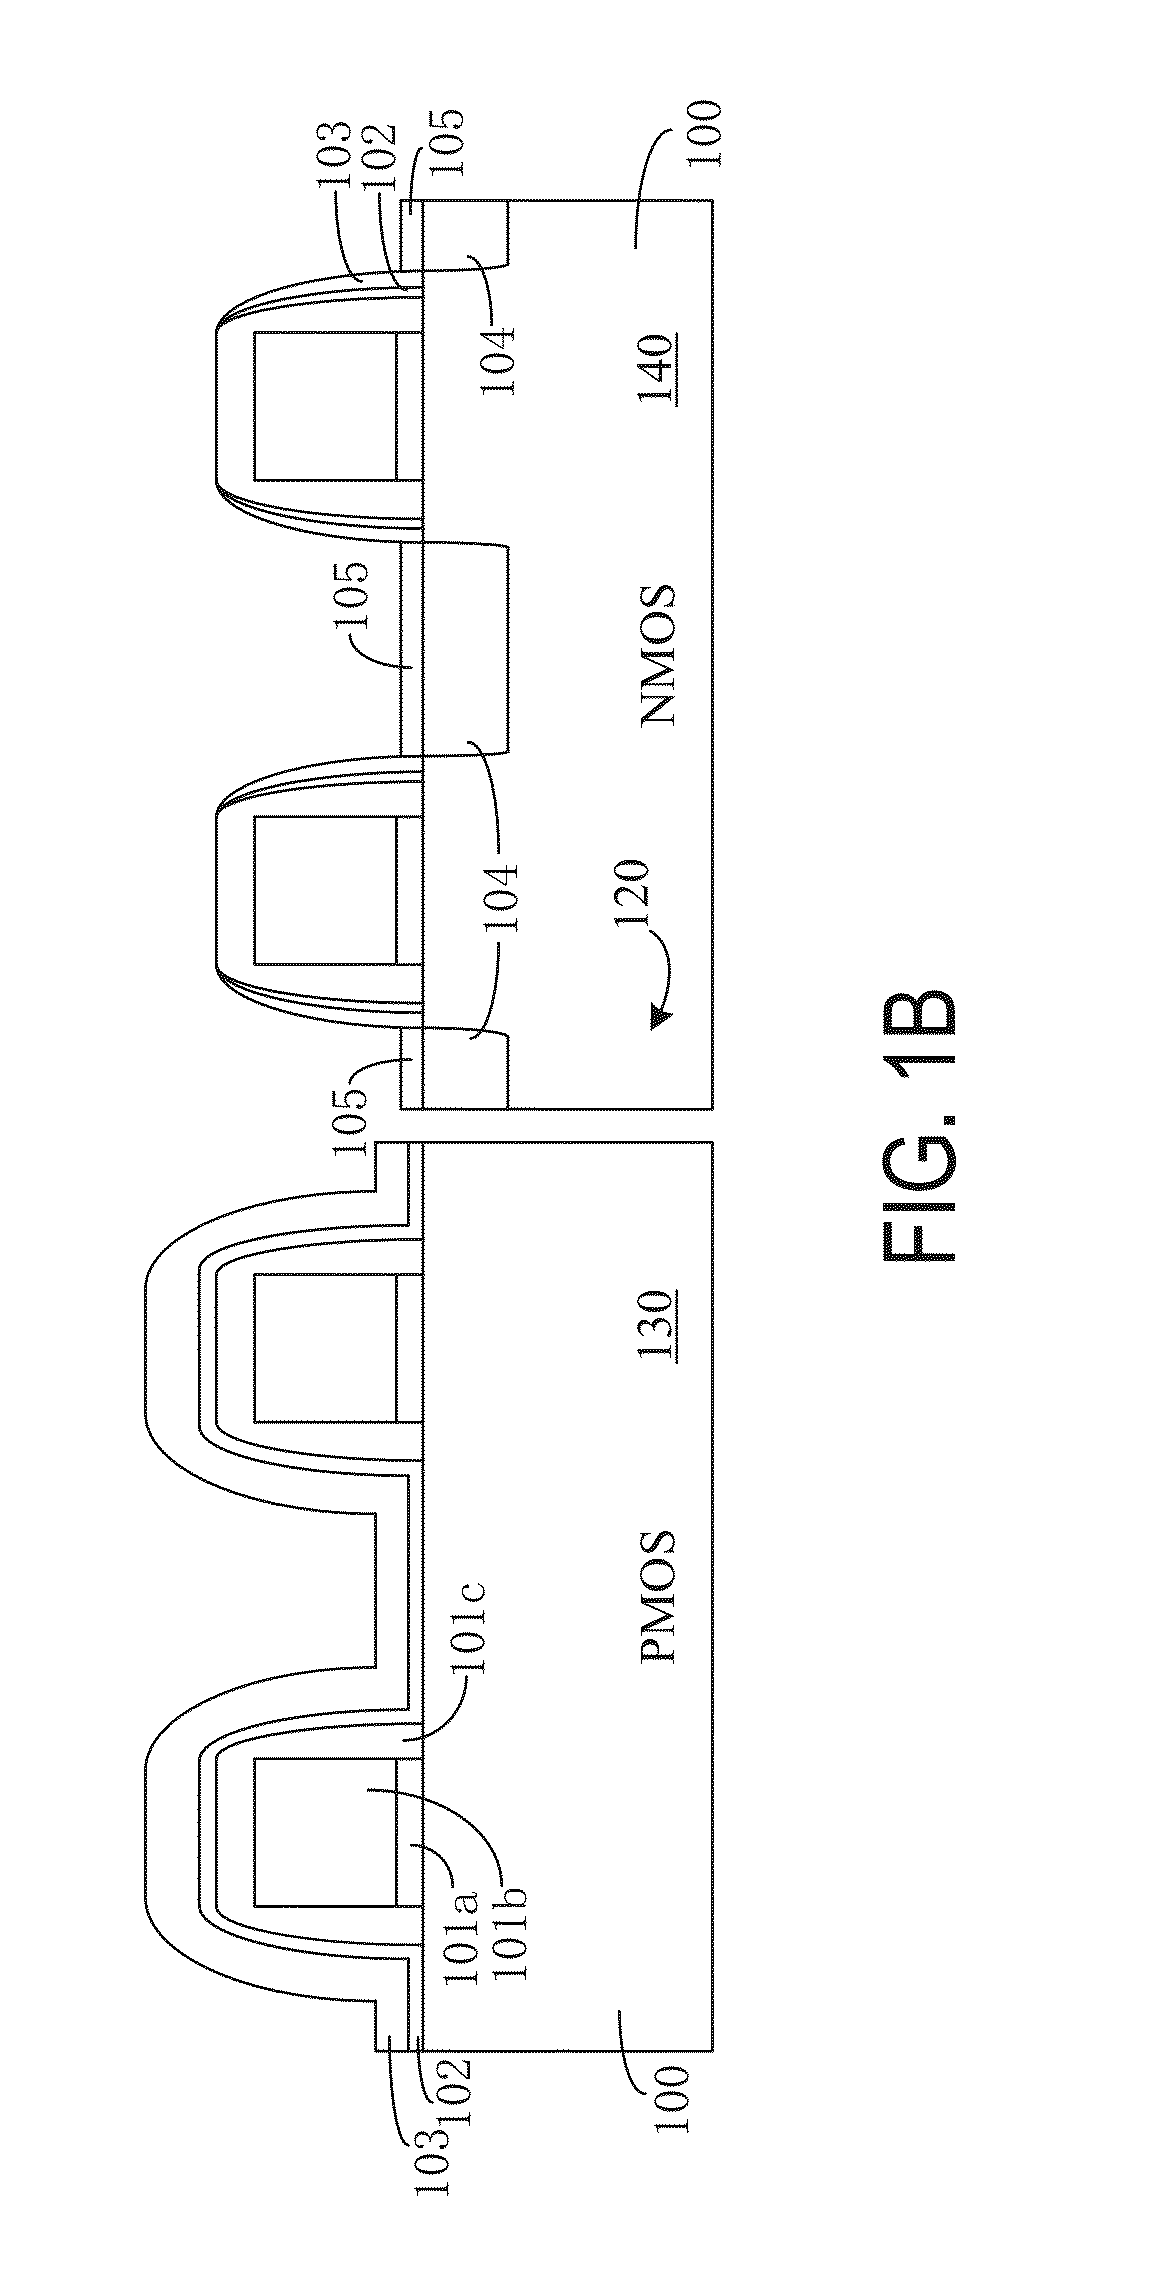 METHODS FOR HIGH-K METAL GATE CMOS WITH SiC AND SiGe SOURCE/DRAIN REGIONS